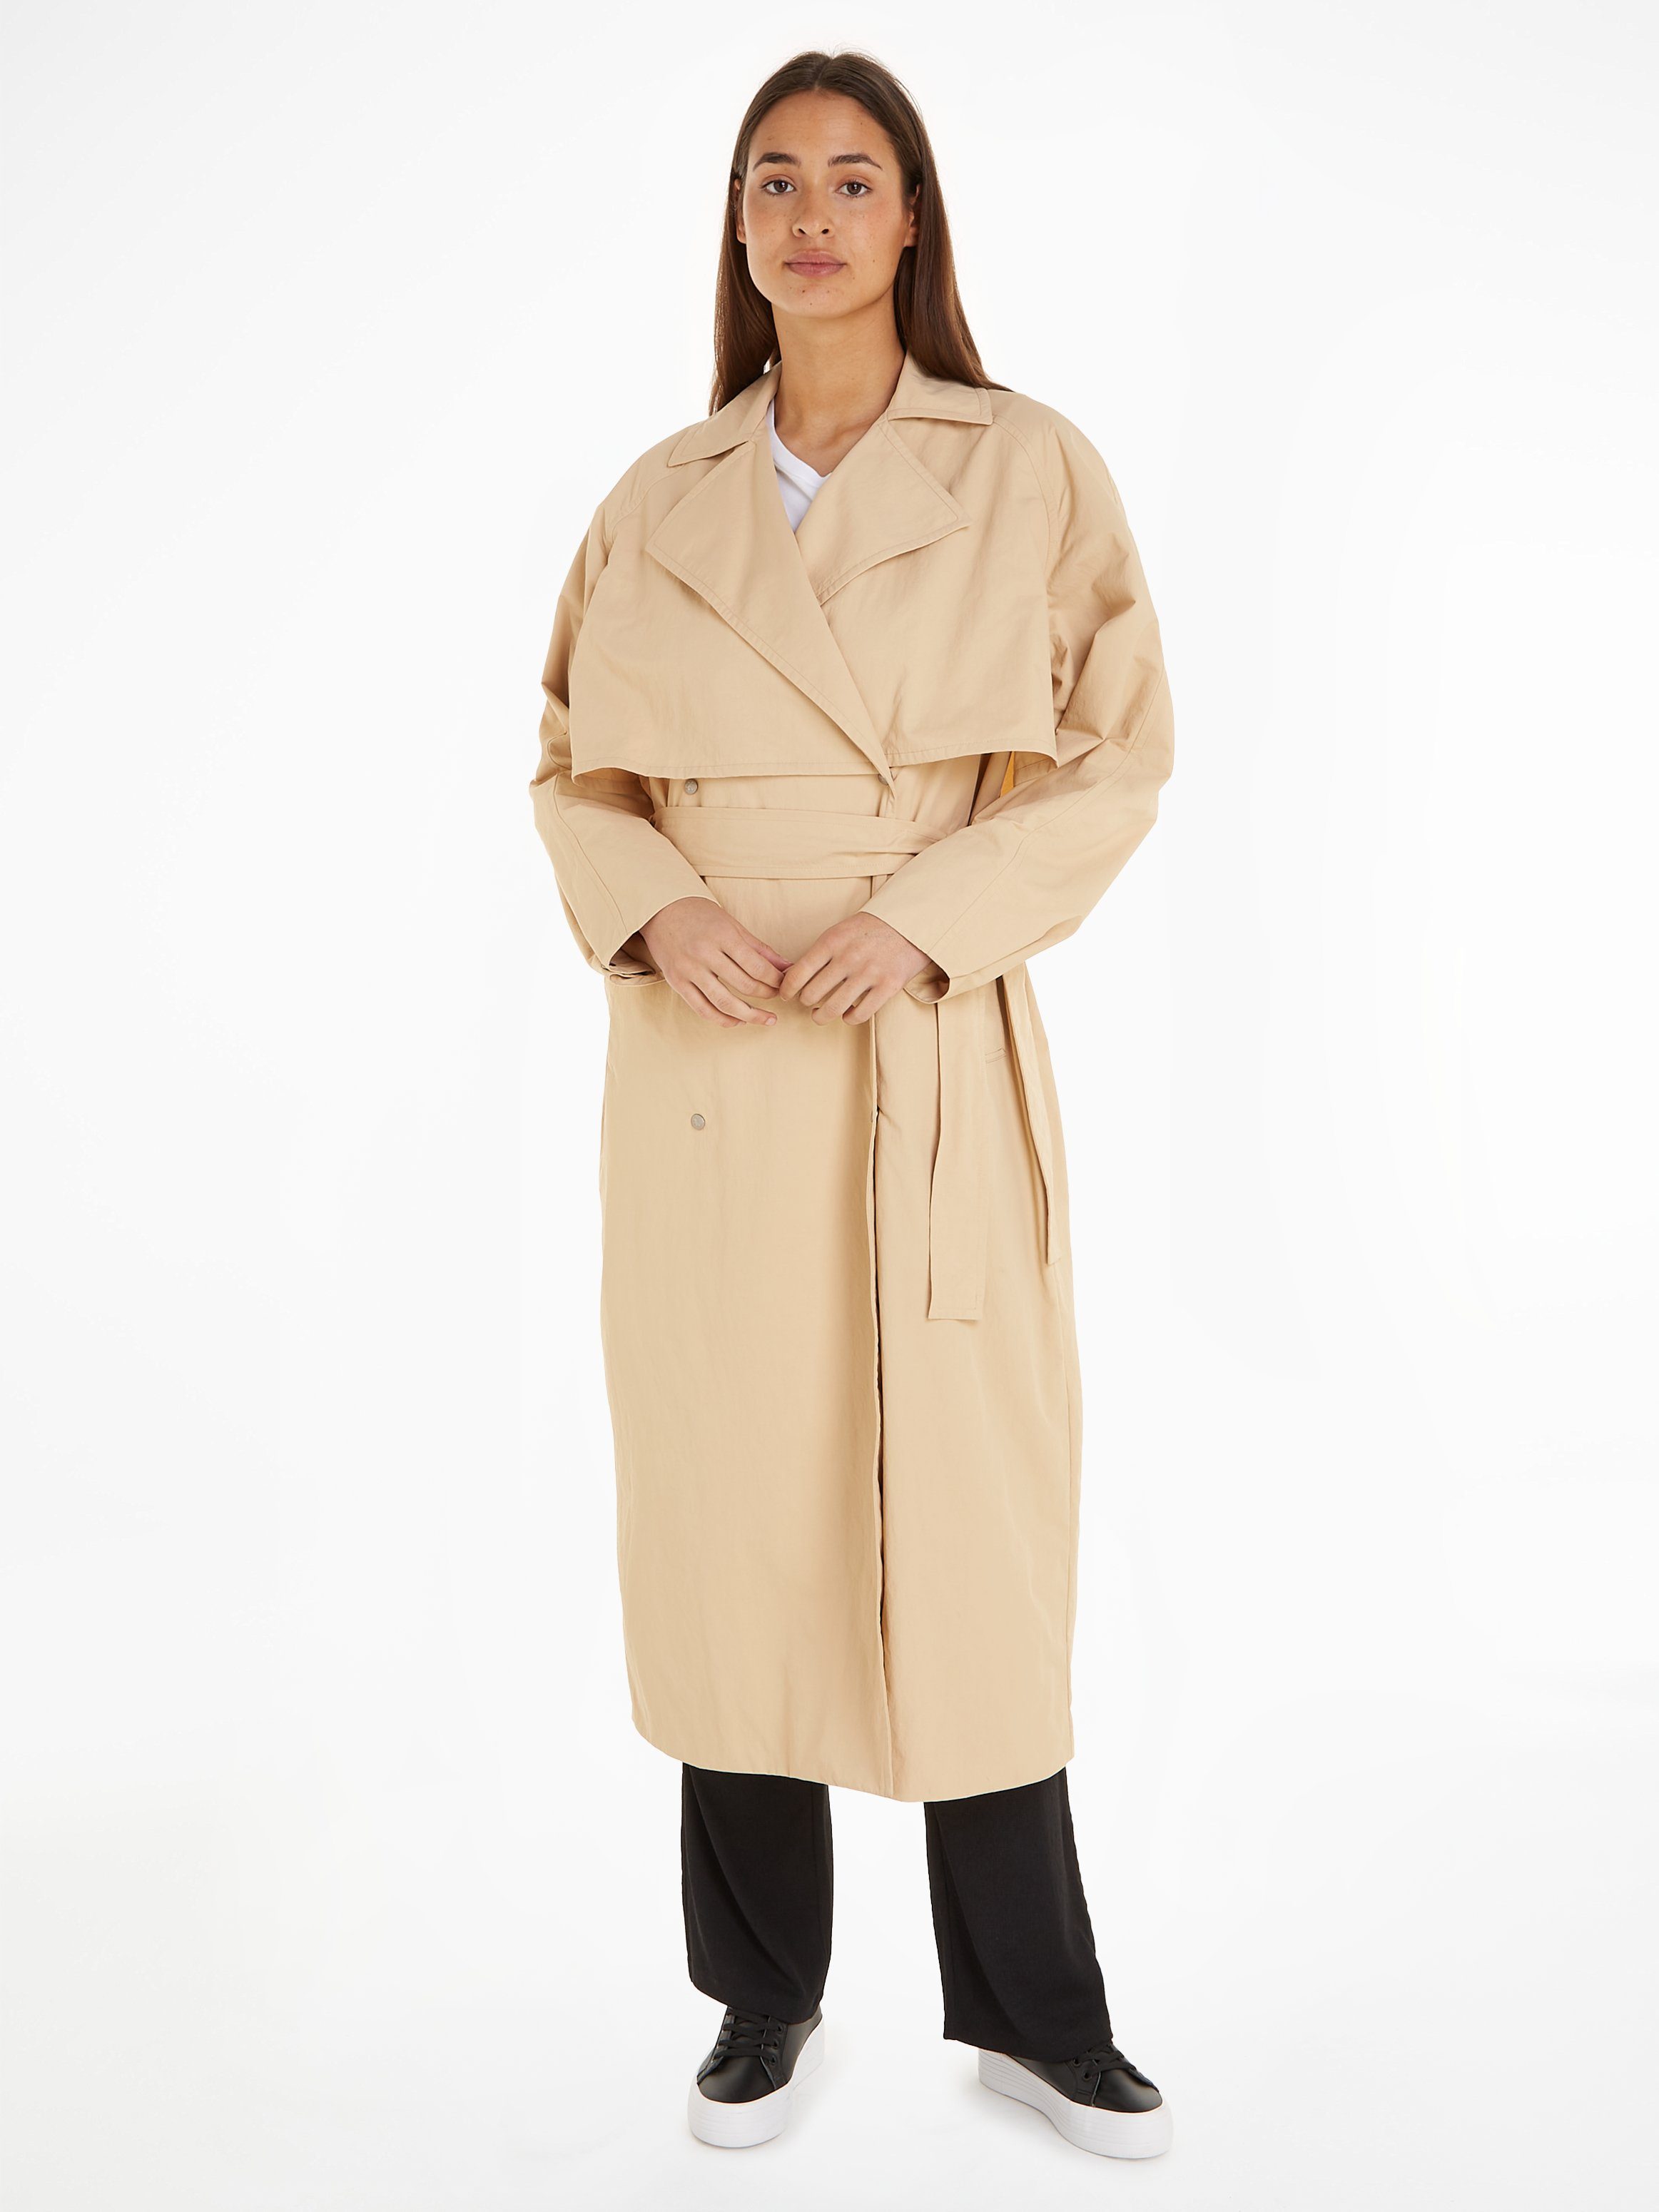 BELTED Calvin Jeans Klein Trenchcoat TRENCH COAT